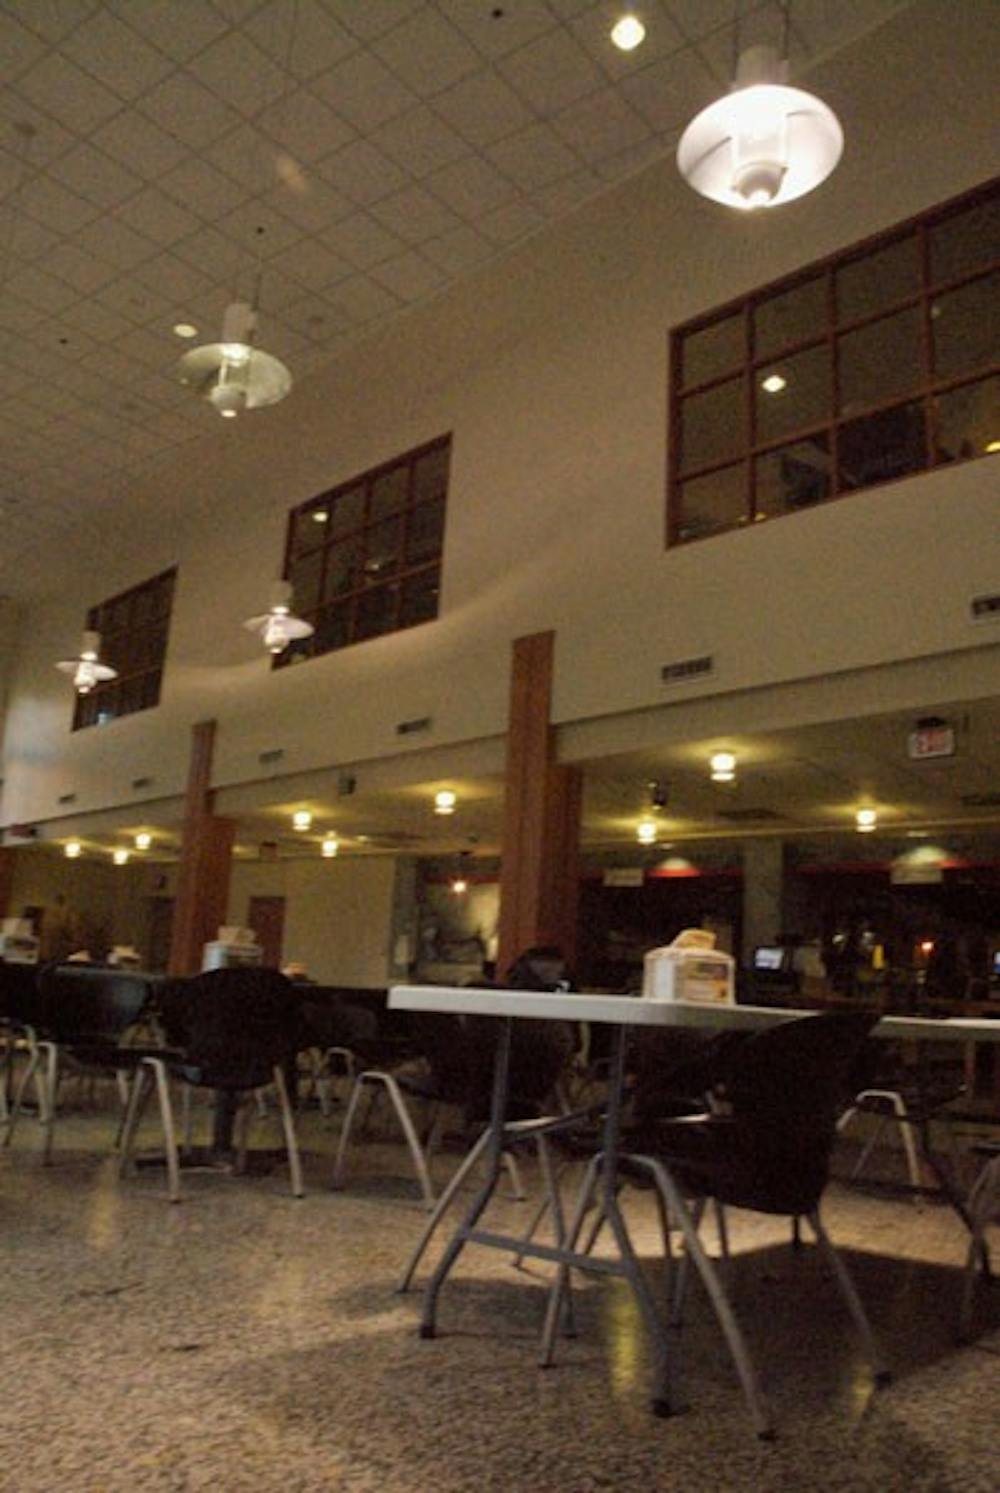 An expanison of Lenoir Hall could provide extra space for diners to sit. DTH/Helen Woolard